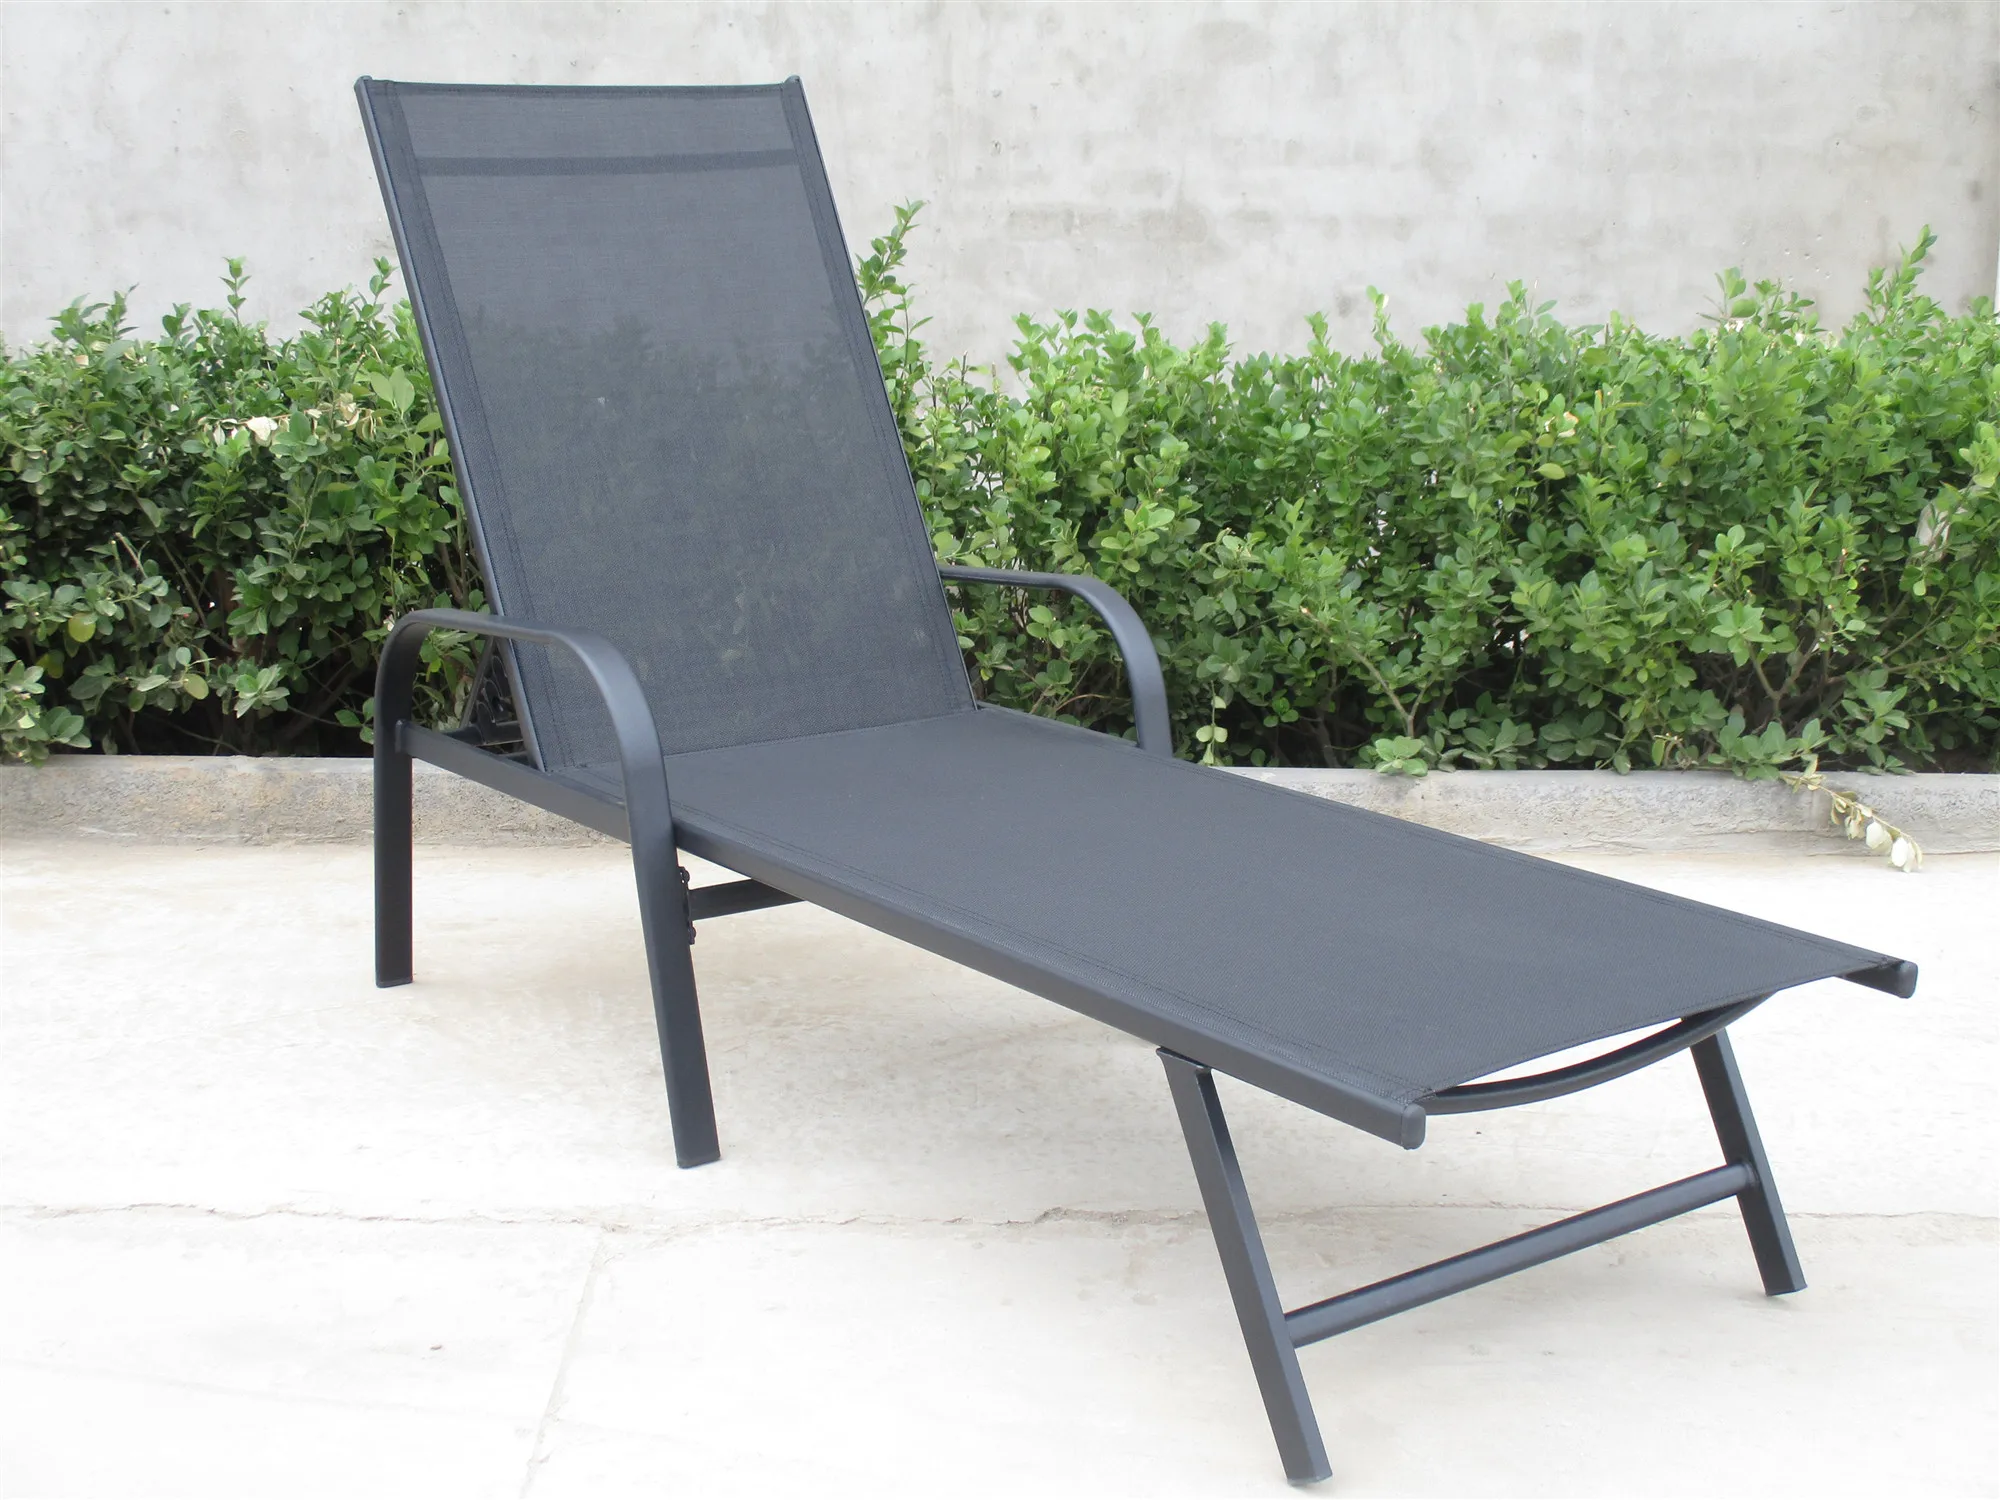 New Style Sun Loungers Laying Chair Garden Furniture Can Bring You A